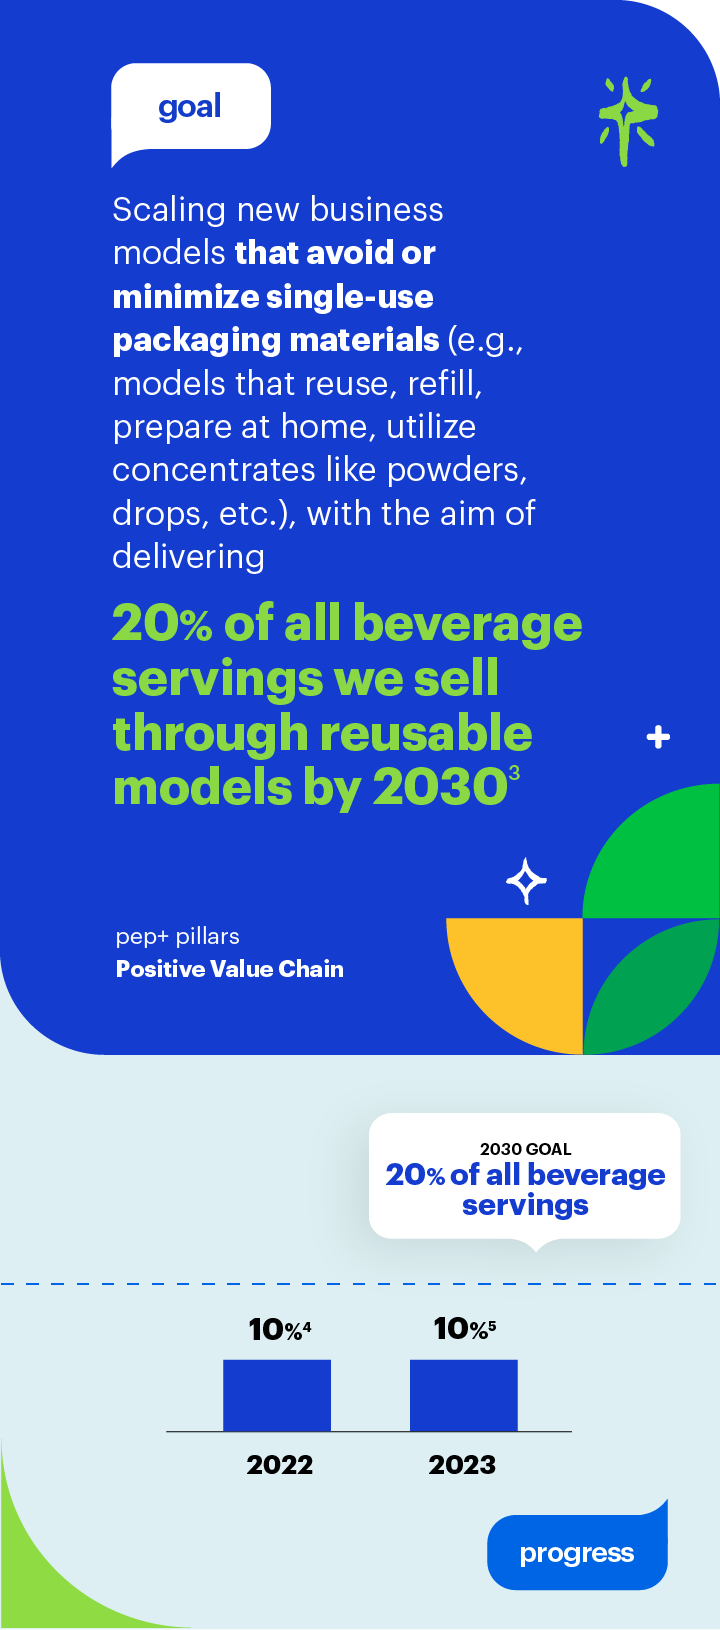 Goal: Scaling new business models that avoid or minimize single-use packaging materials